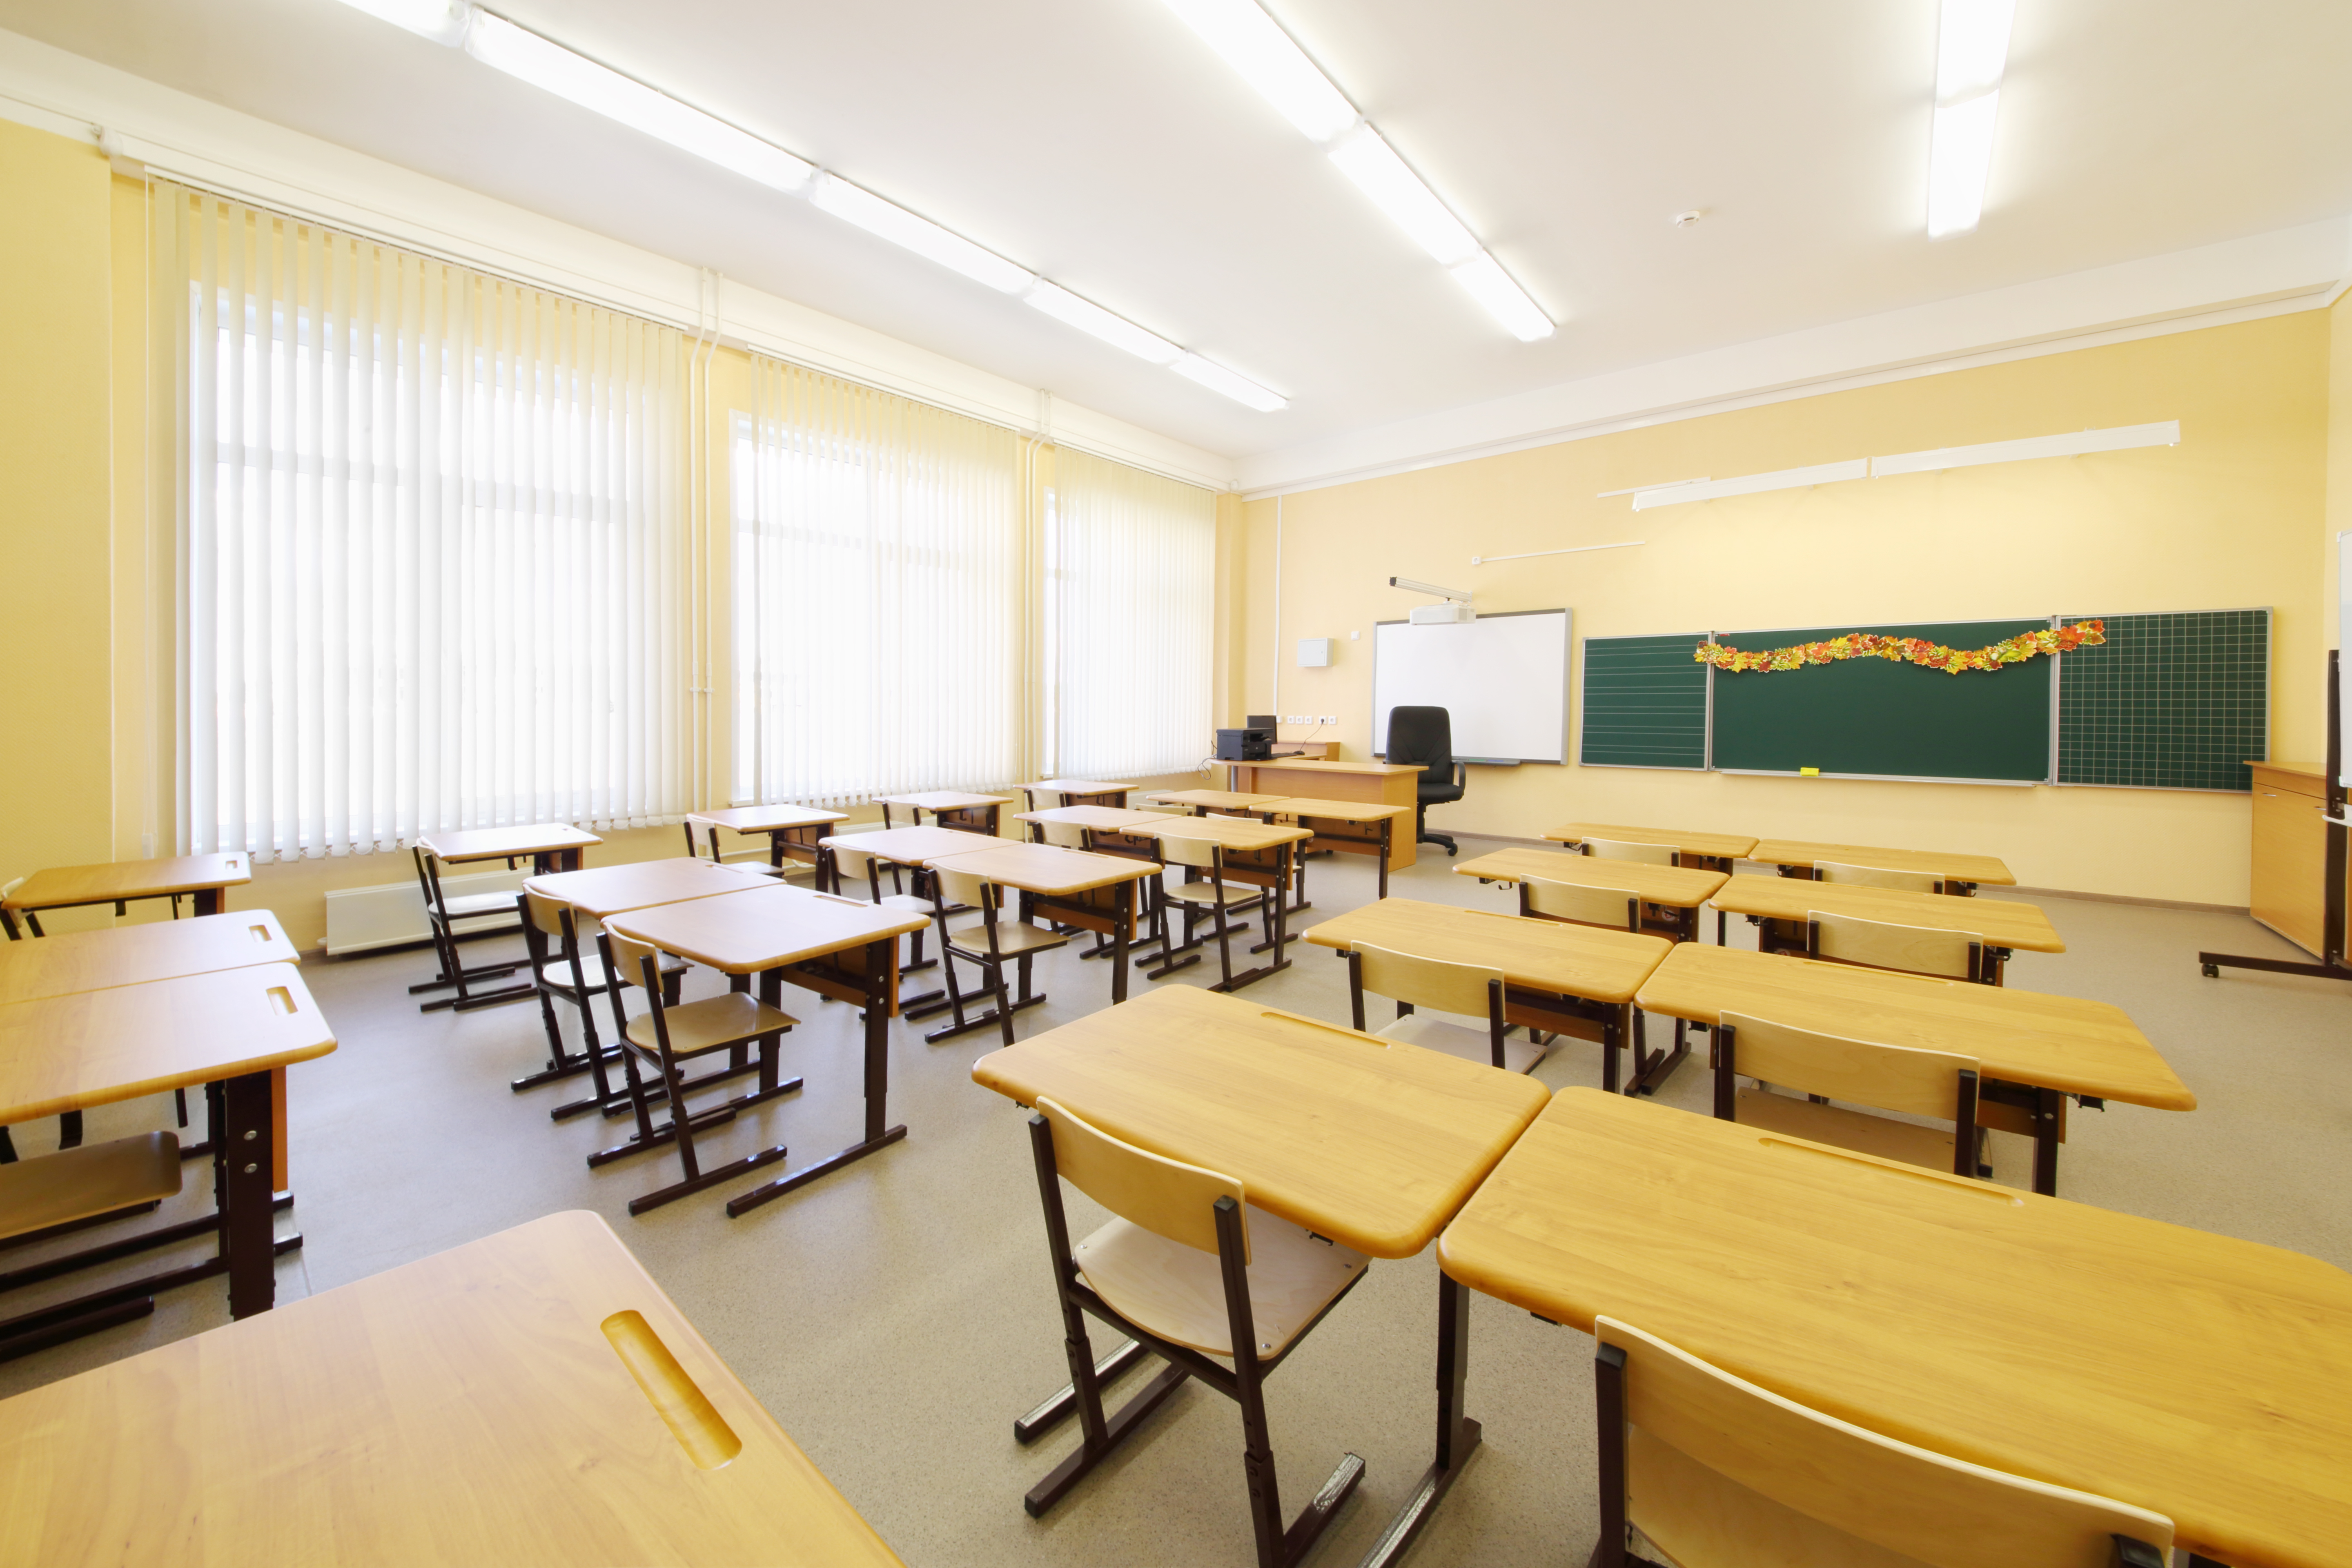 Buying School Furniture in Singapore? Consider these 10 Tips First